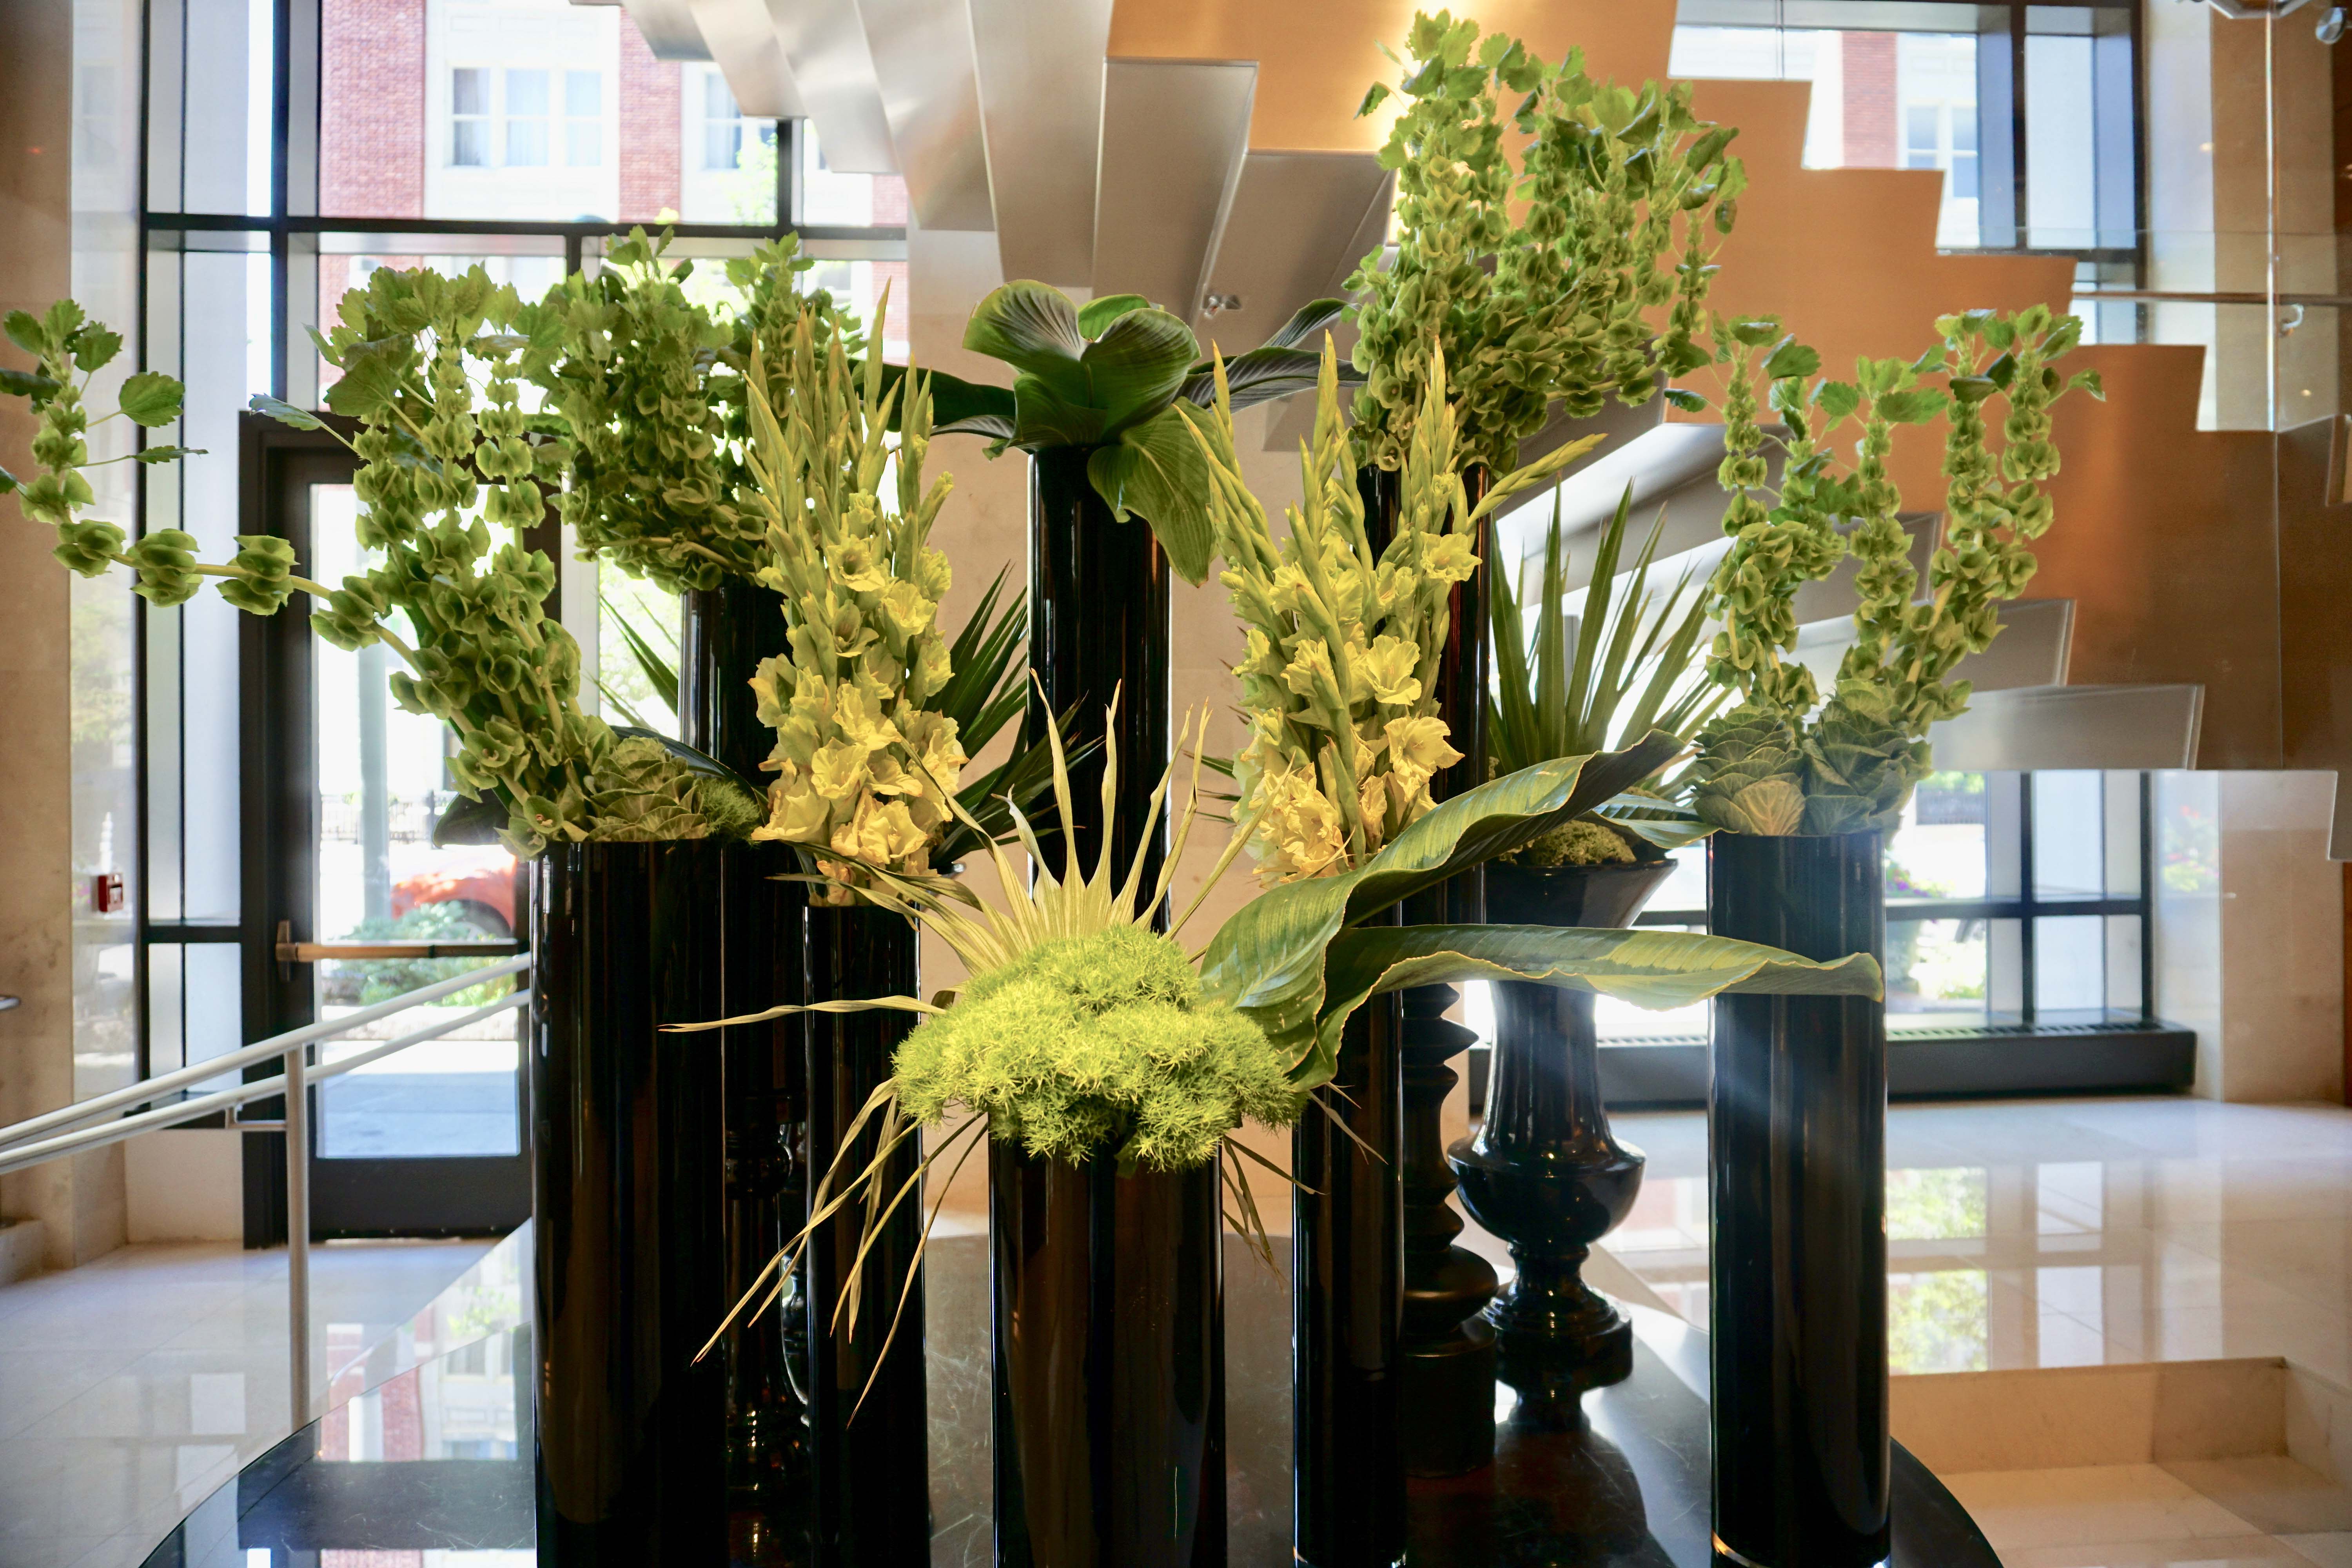 Lobby flowers at Fours Season Denver. See the all other things to do in Denver, Colorado with kids #Denver #Colorado #ThingsToDo #FourSeasonsDenver